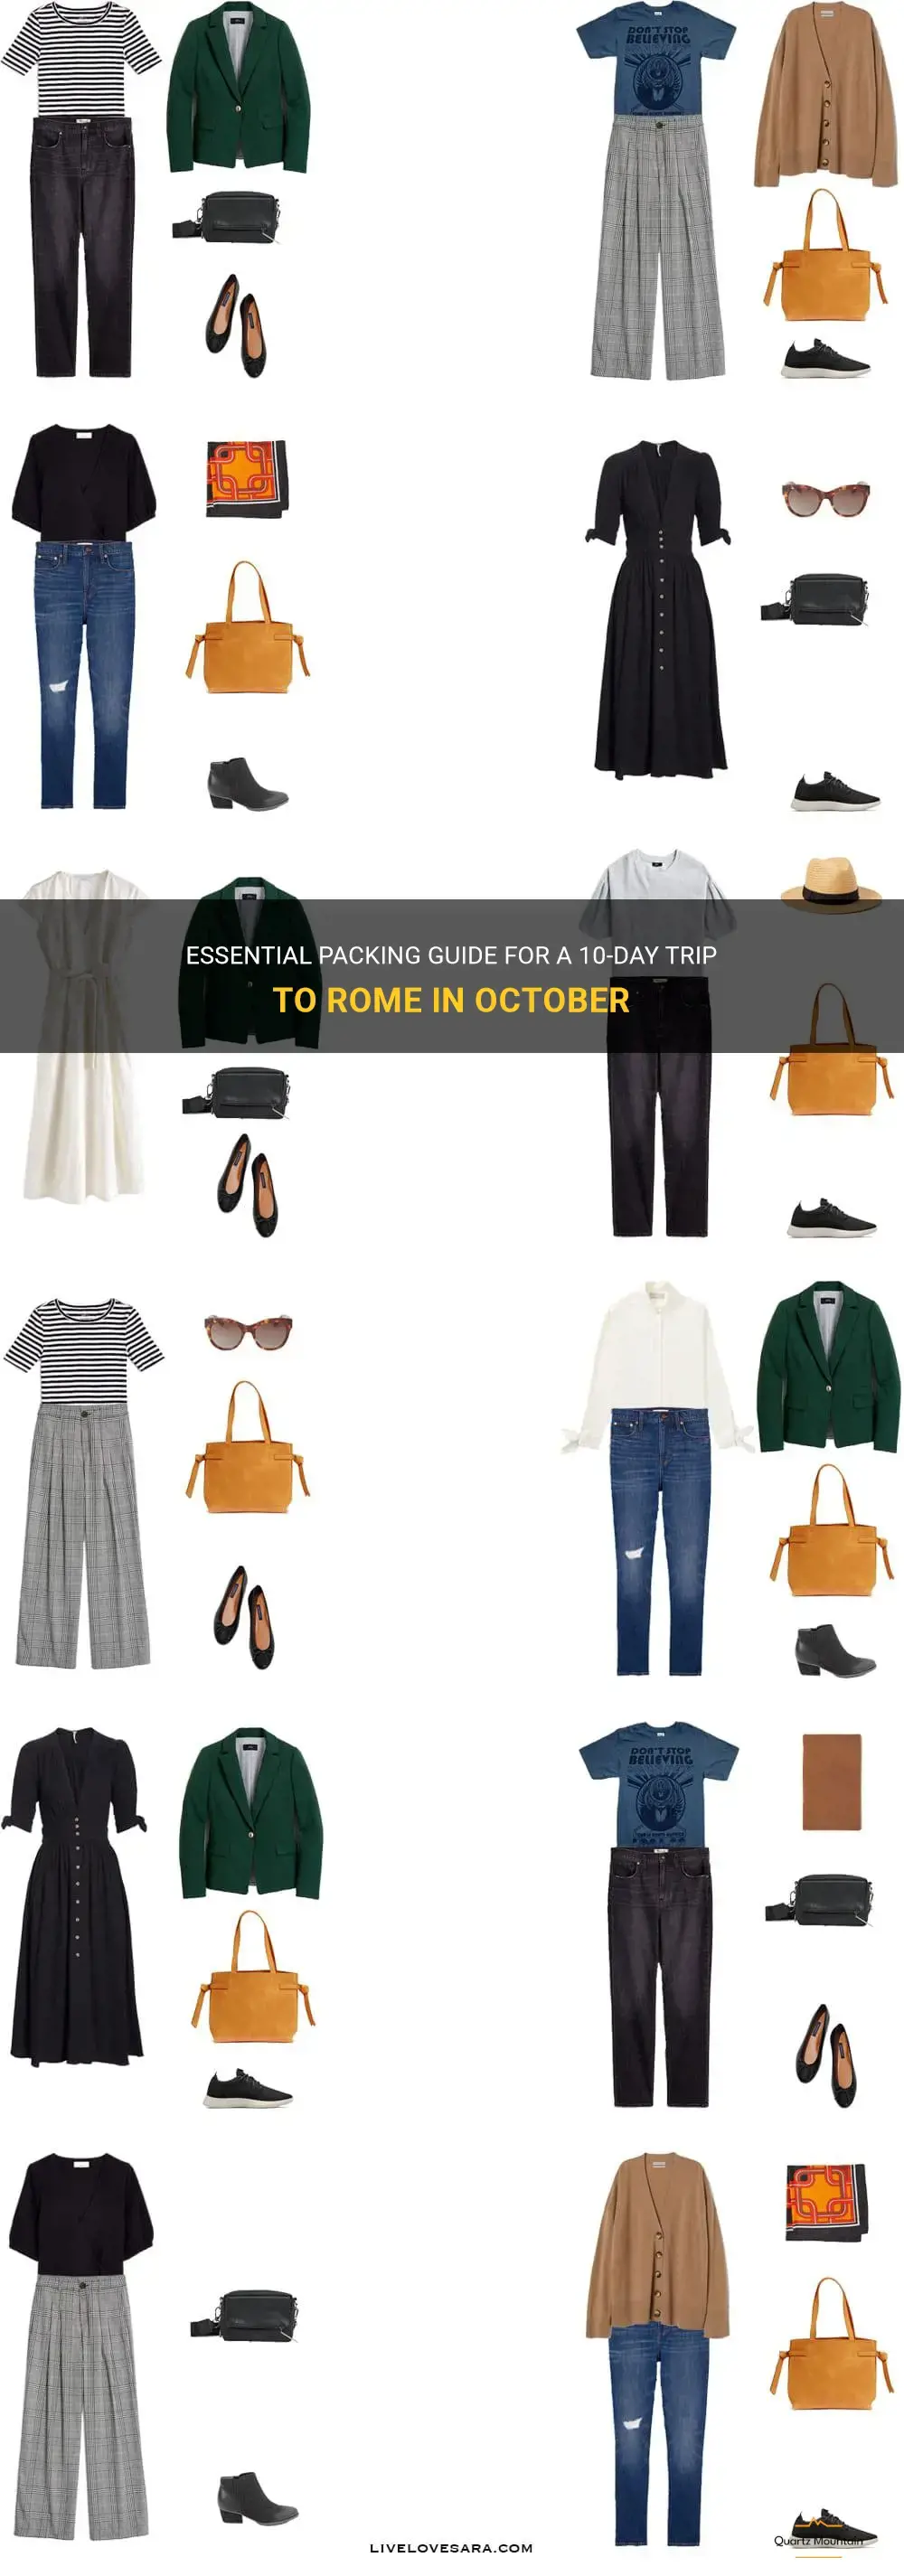 what to pack for 10 days in rome in October